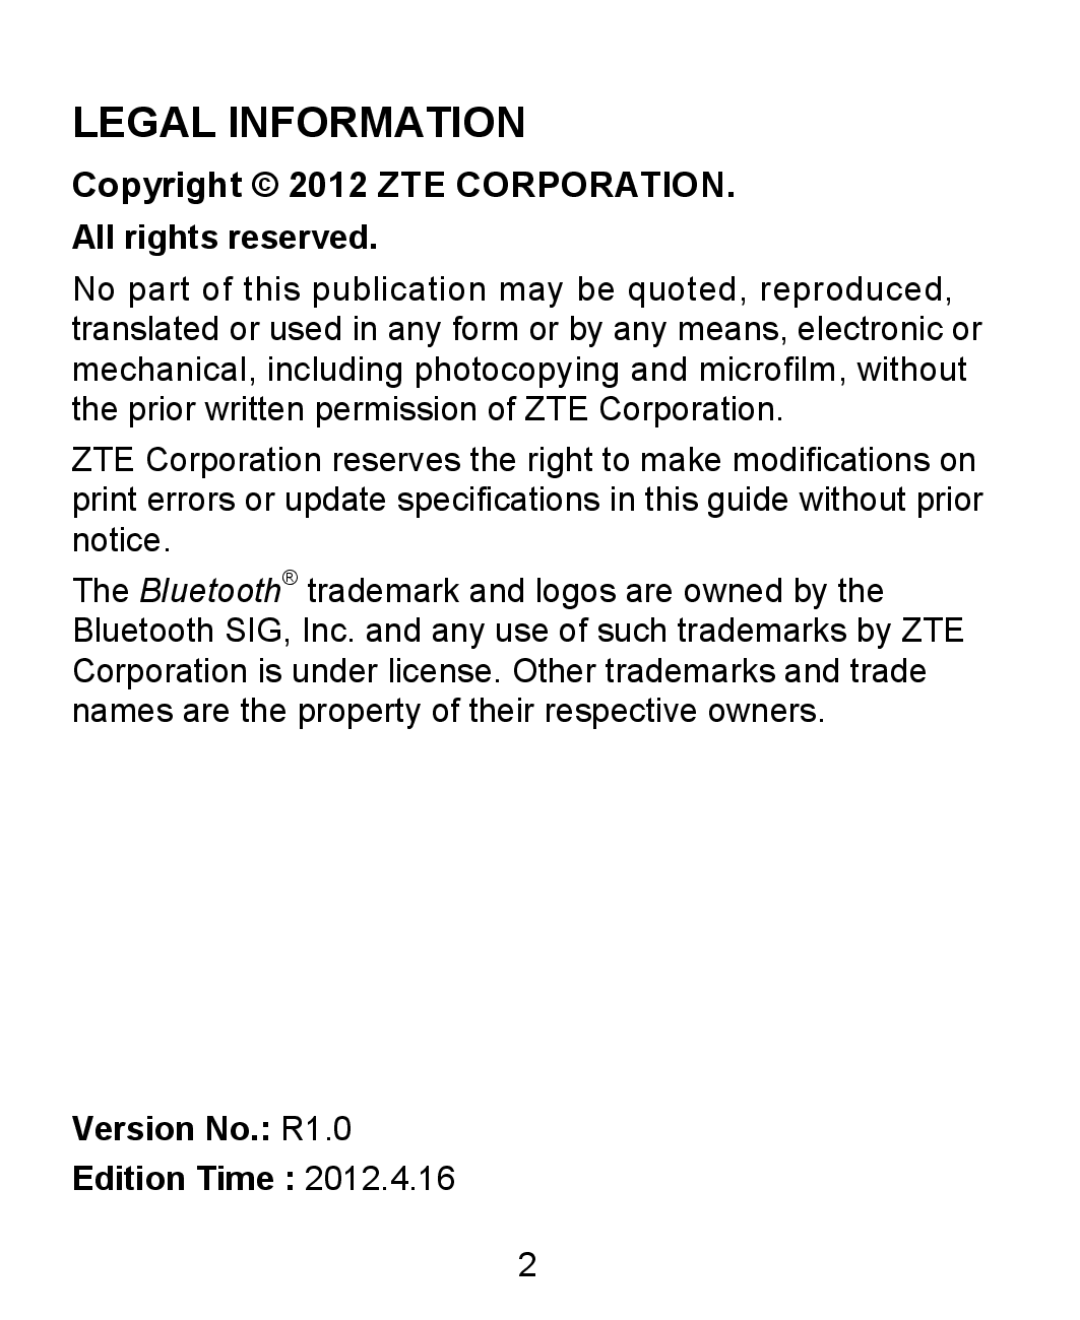 ZTE KIS user manual Copyright 2012 ZTE Corporation All rights reserved, Version No. R1.0 Edition Time 